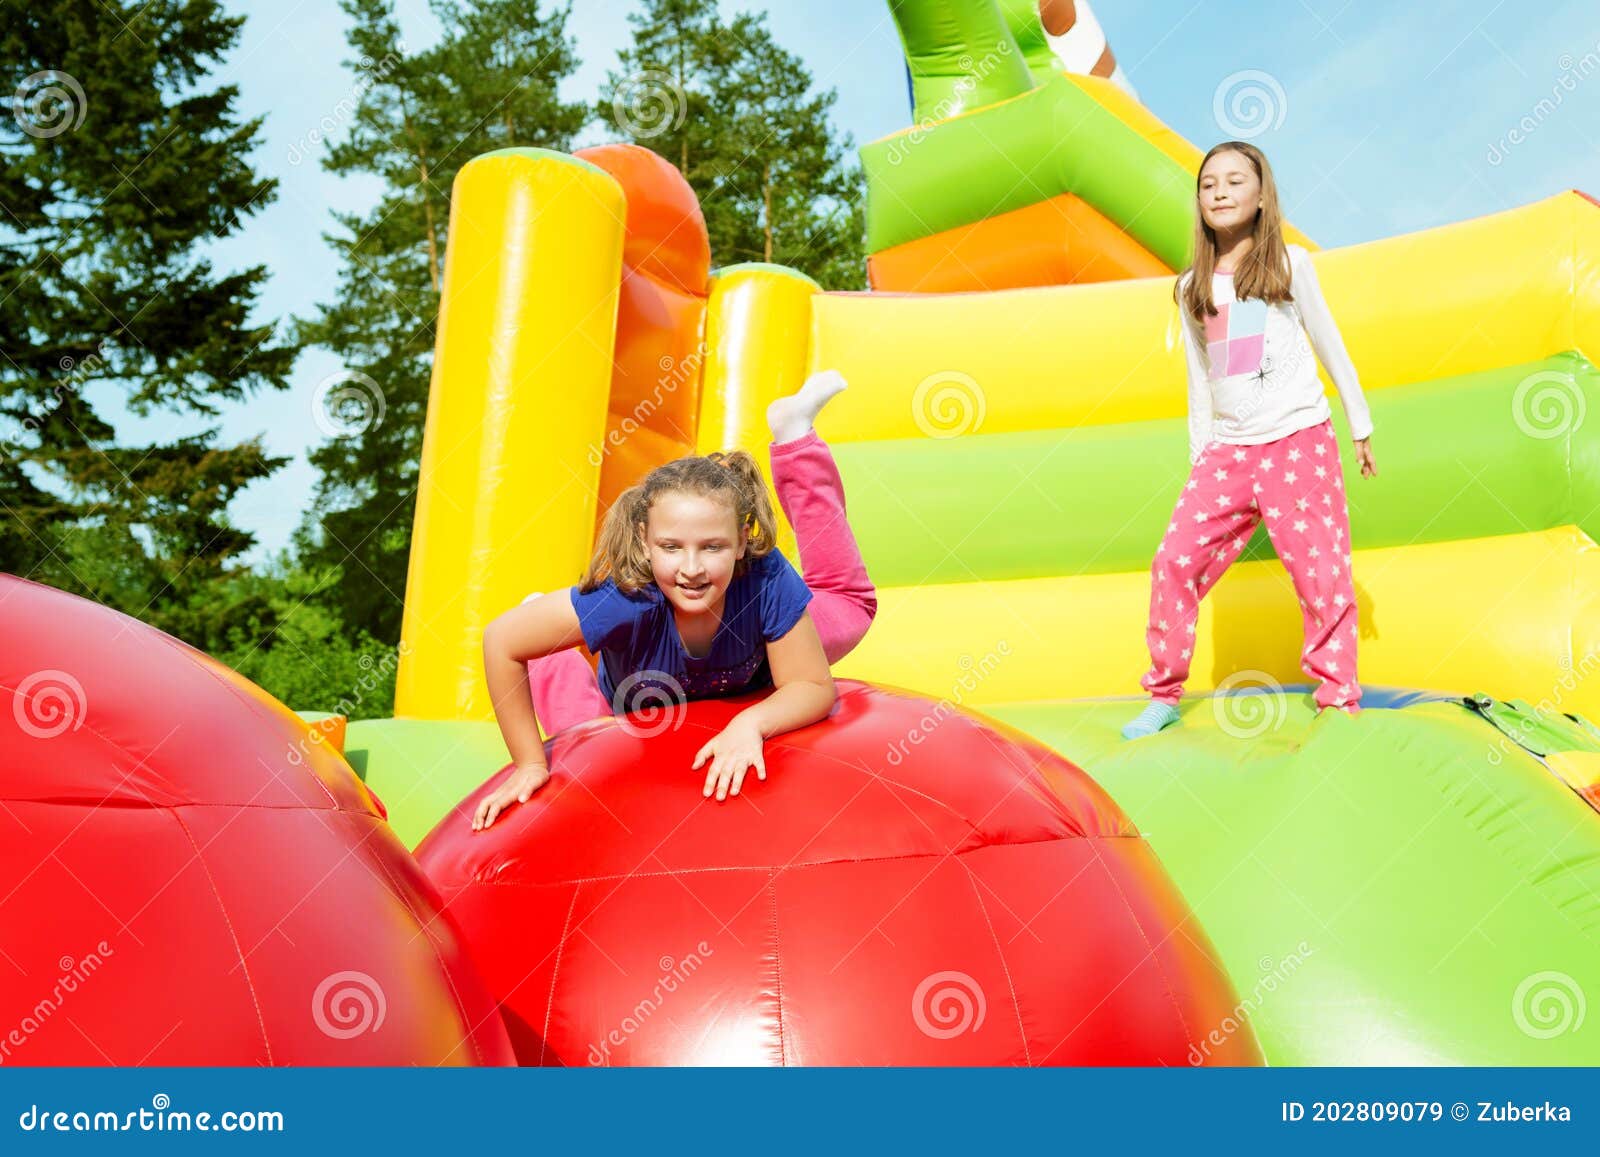 two girls jumping on inflate castle